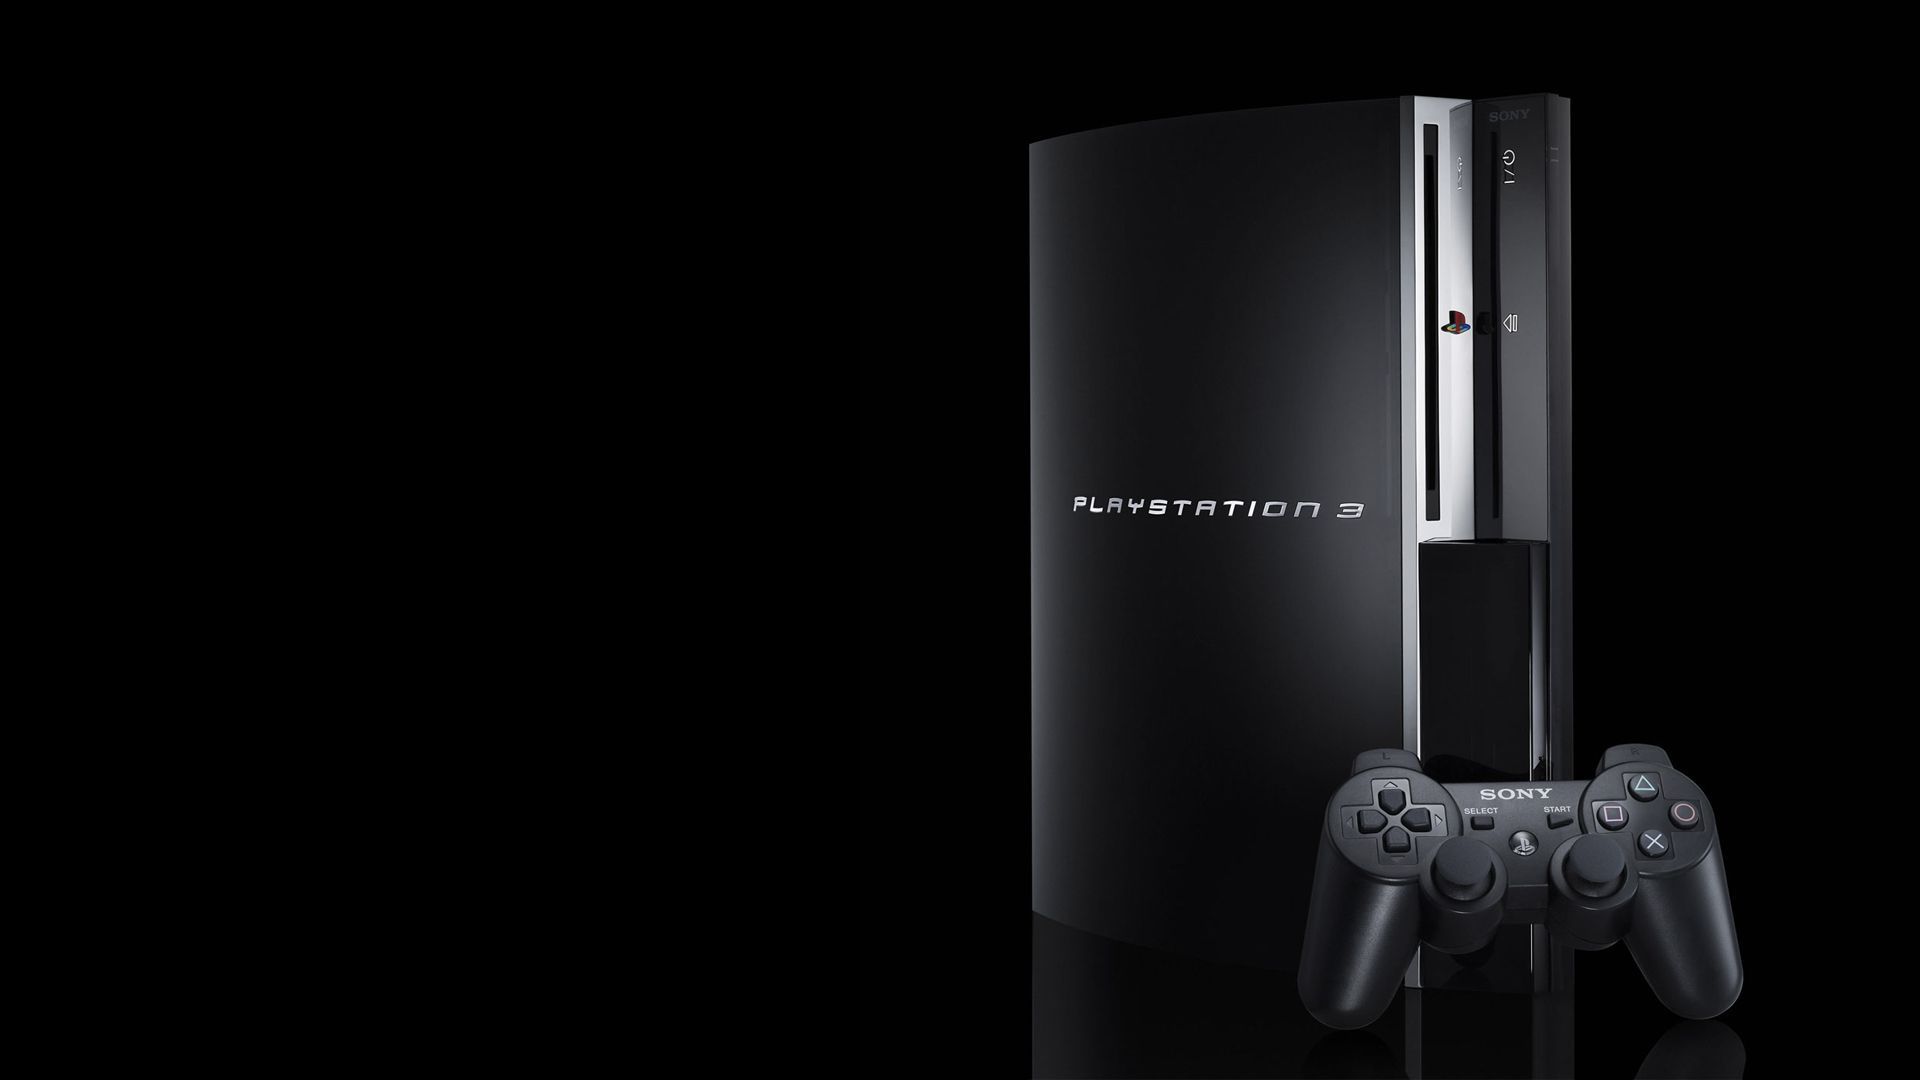 PS3 on Black Background Wallpaper